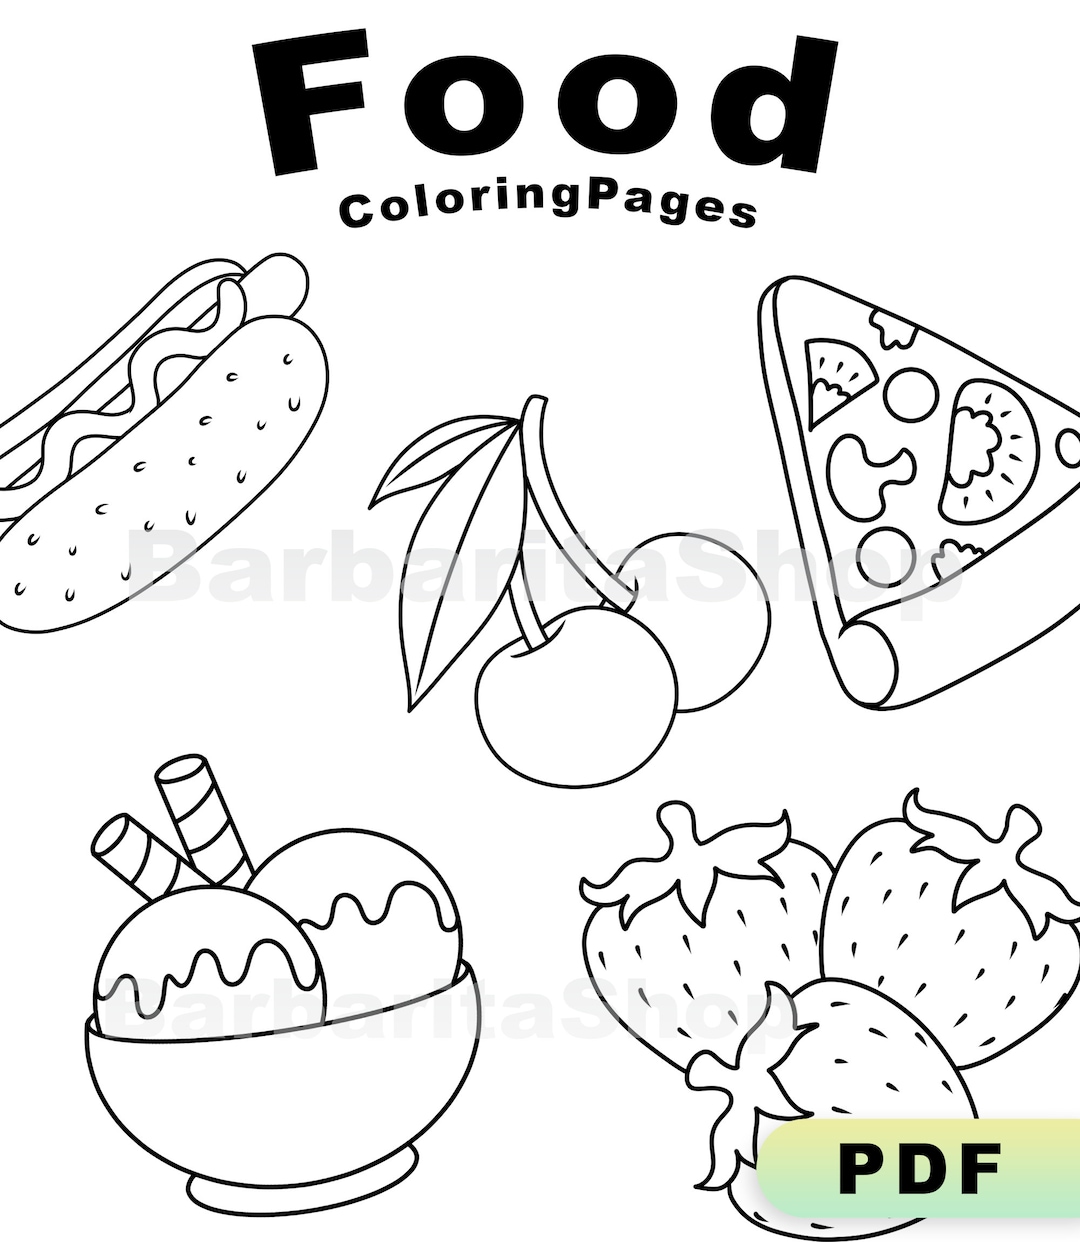 Food coloring pages pizza coloring book burger coloring book cake coloring book pdf download now